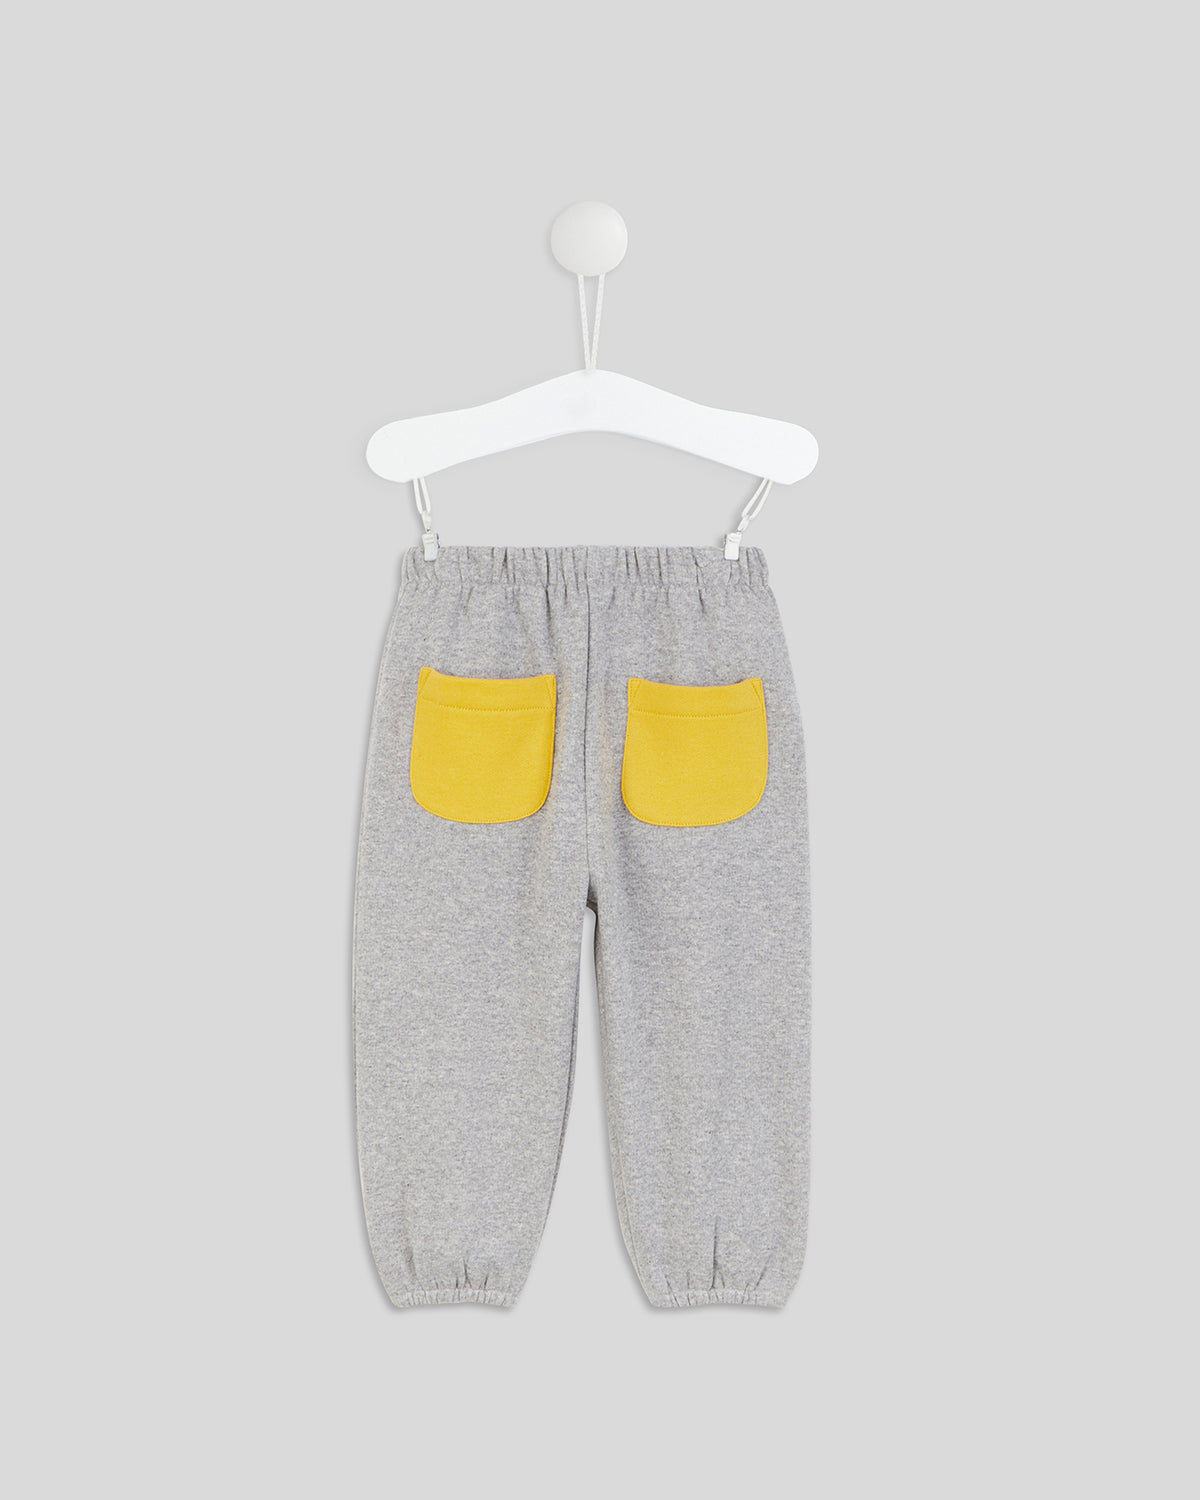 back image of the Grey with Marigold Pockets Baby Joggers, showing off the marigold pockets